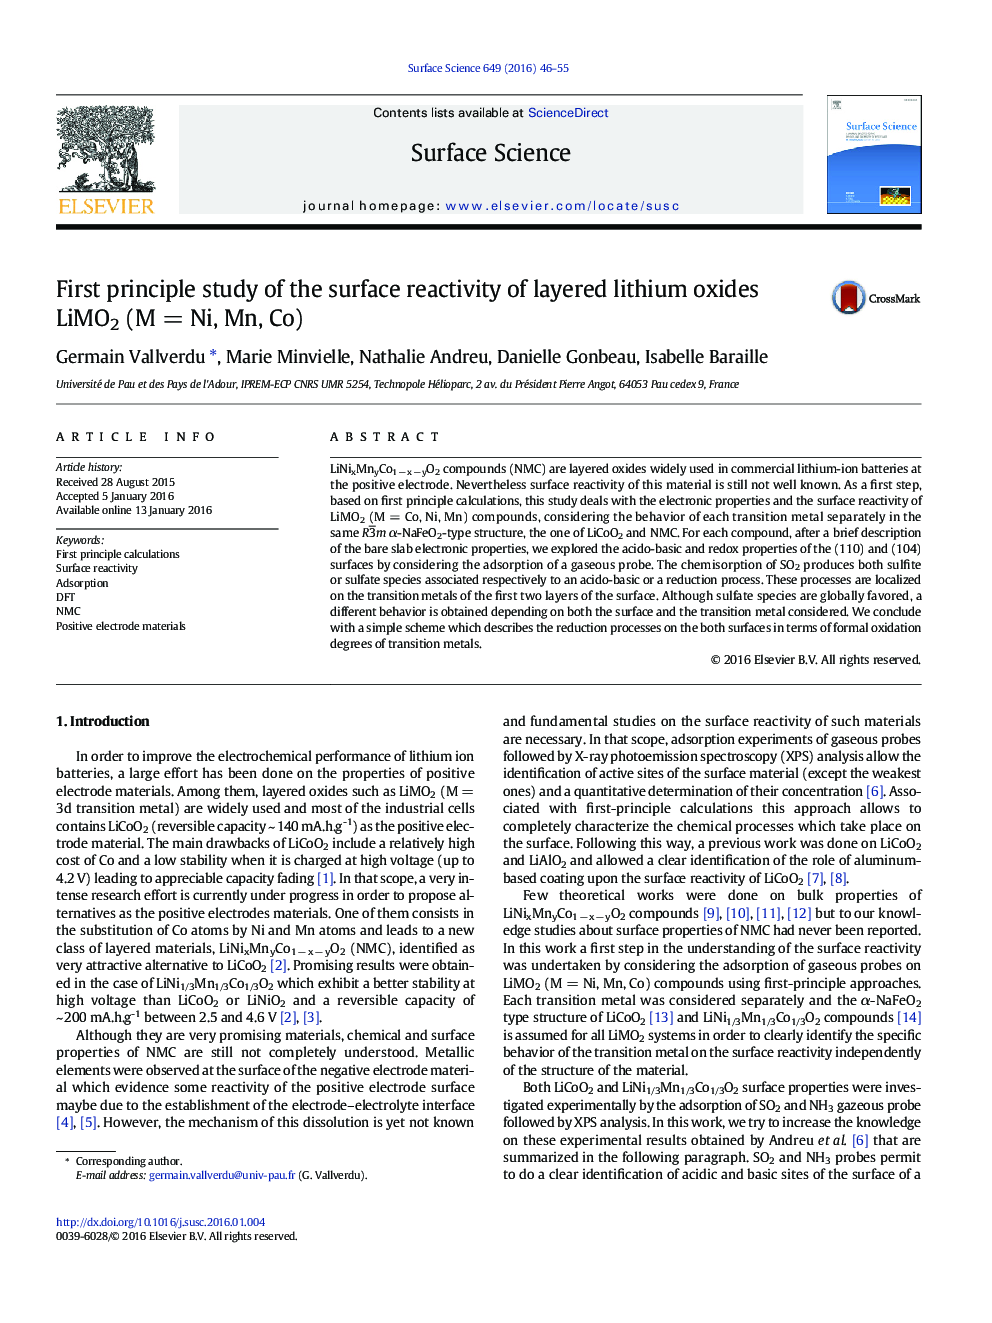 First principle study of the surface reactivity of layered lithium oxides LiMO2 (MÂ =Â Ni, Mn, Co)